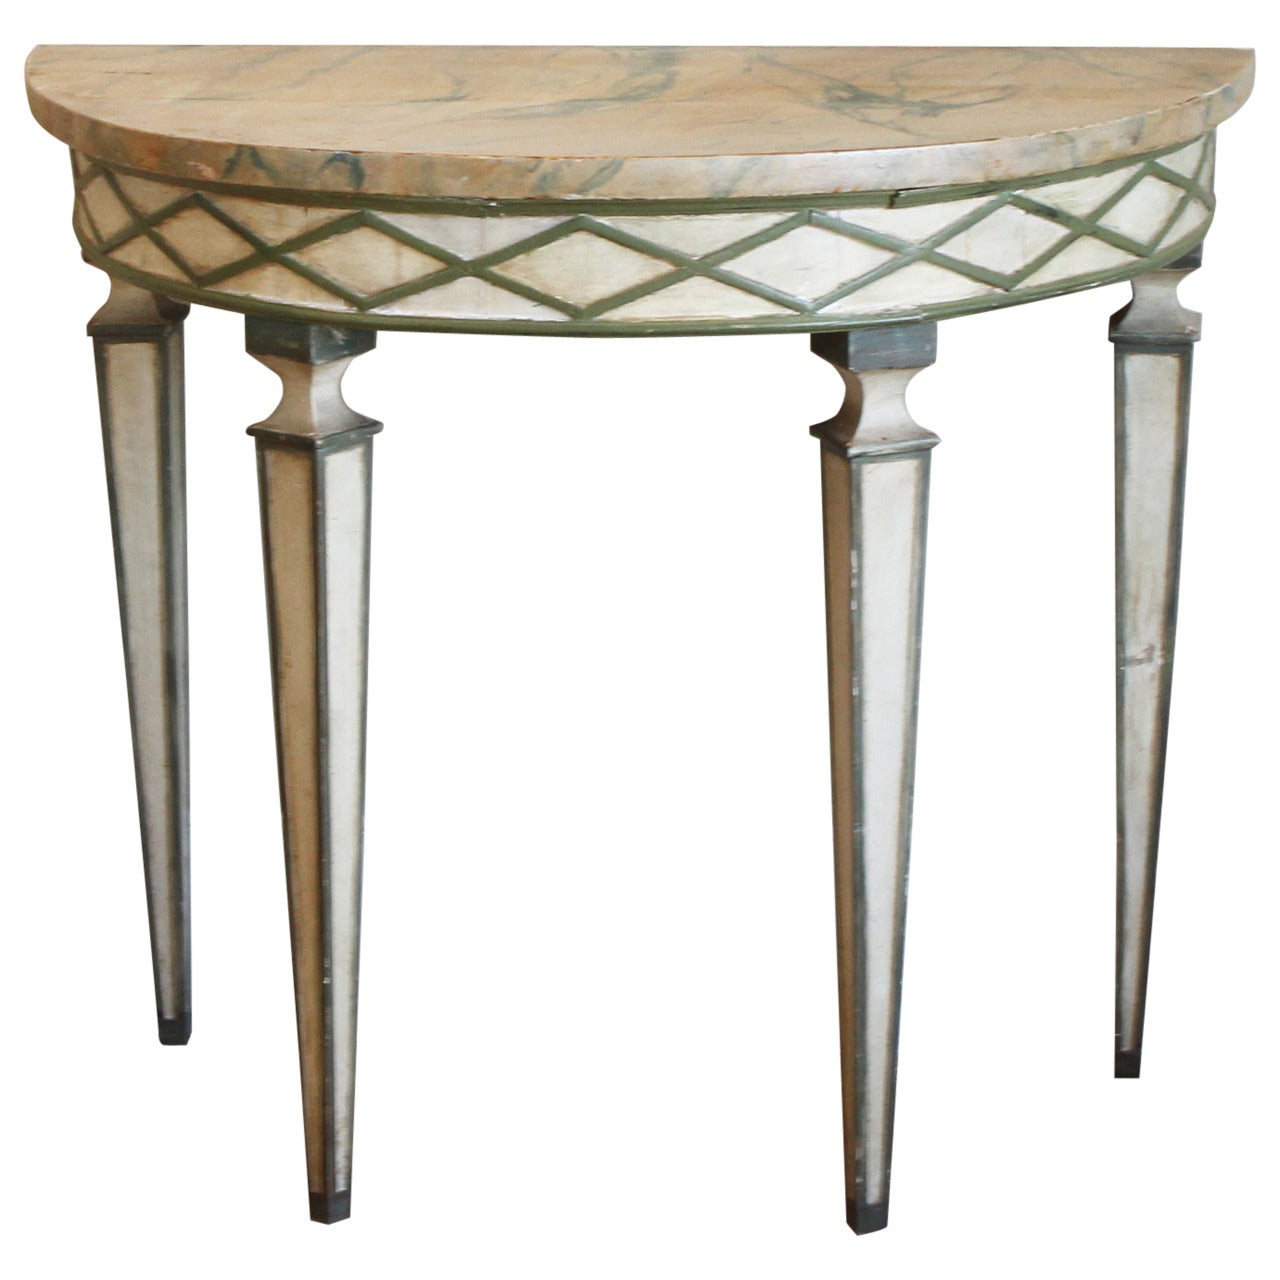 Italian Paint Decorated Demilune Console Table